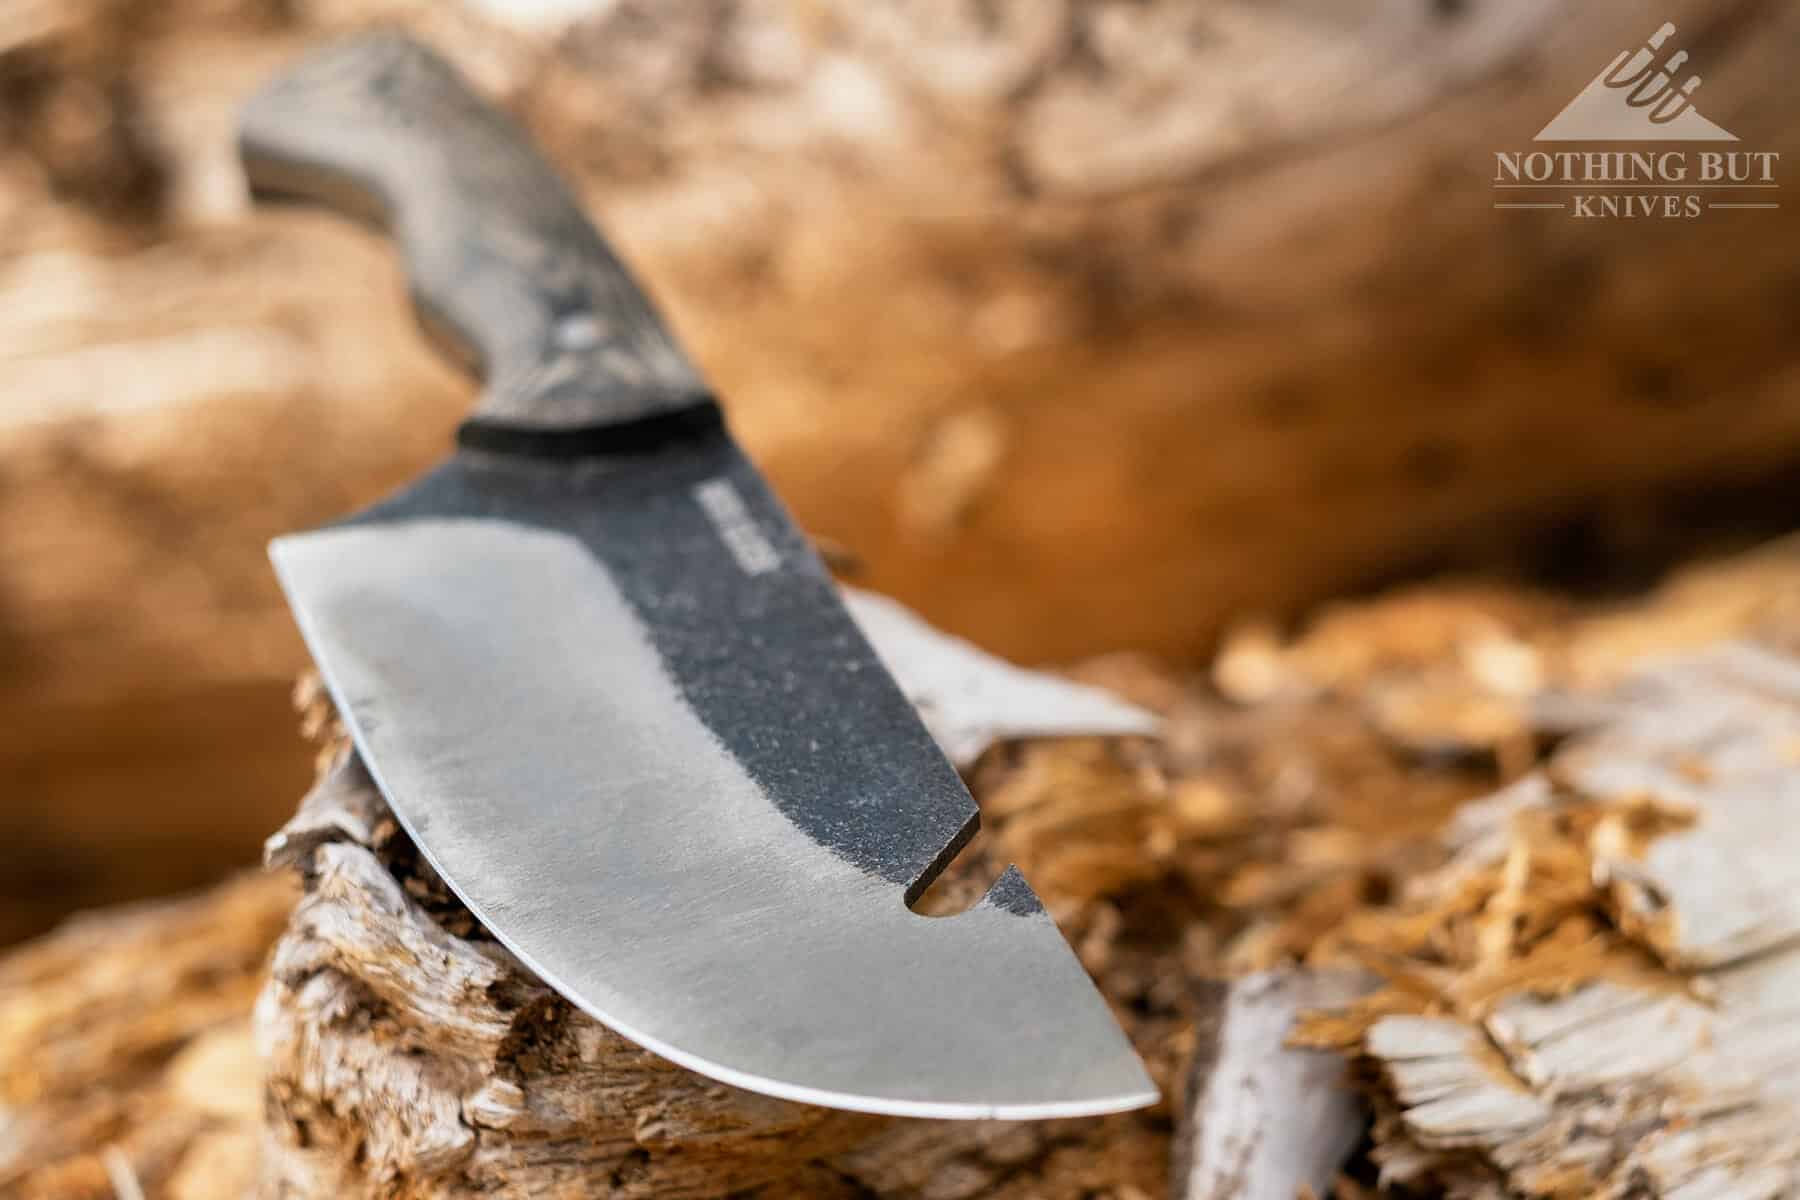 The Bush Slicer has a convex grind which is more common in kitchen cutlery than survival or bushcraft knives.